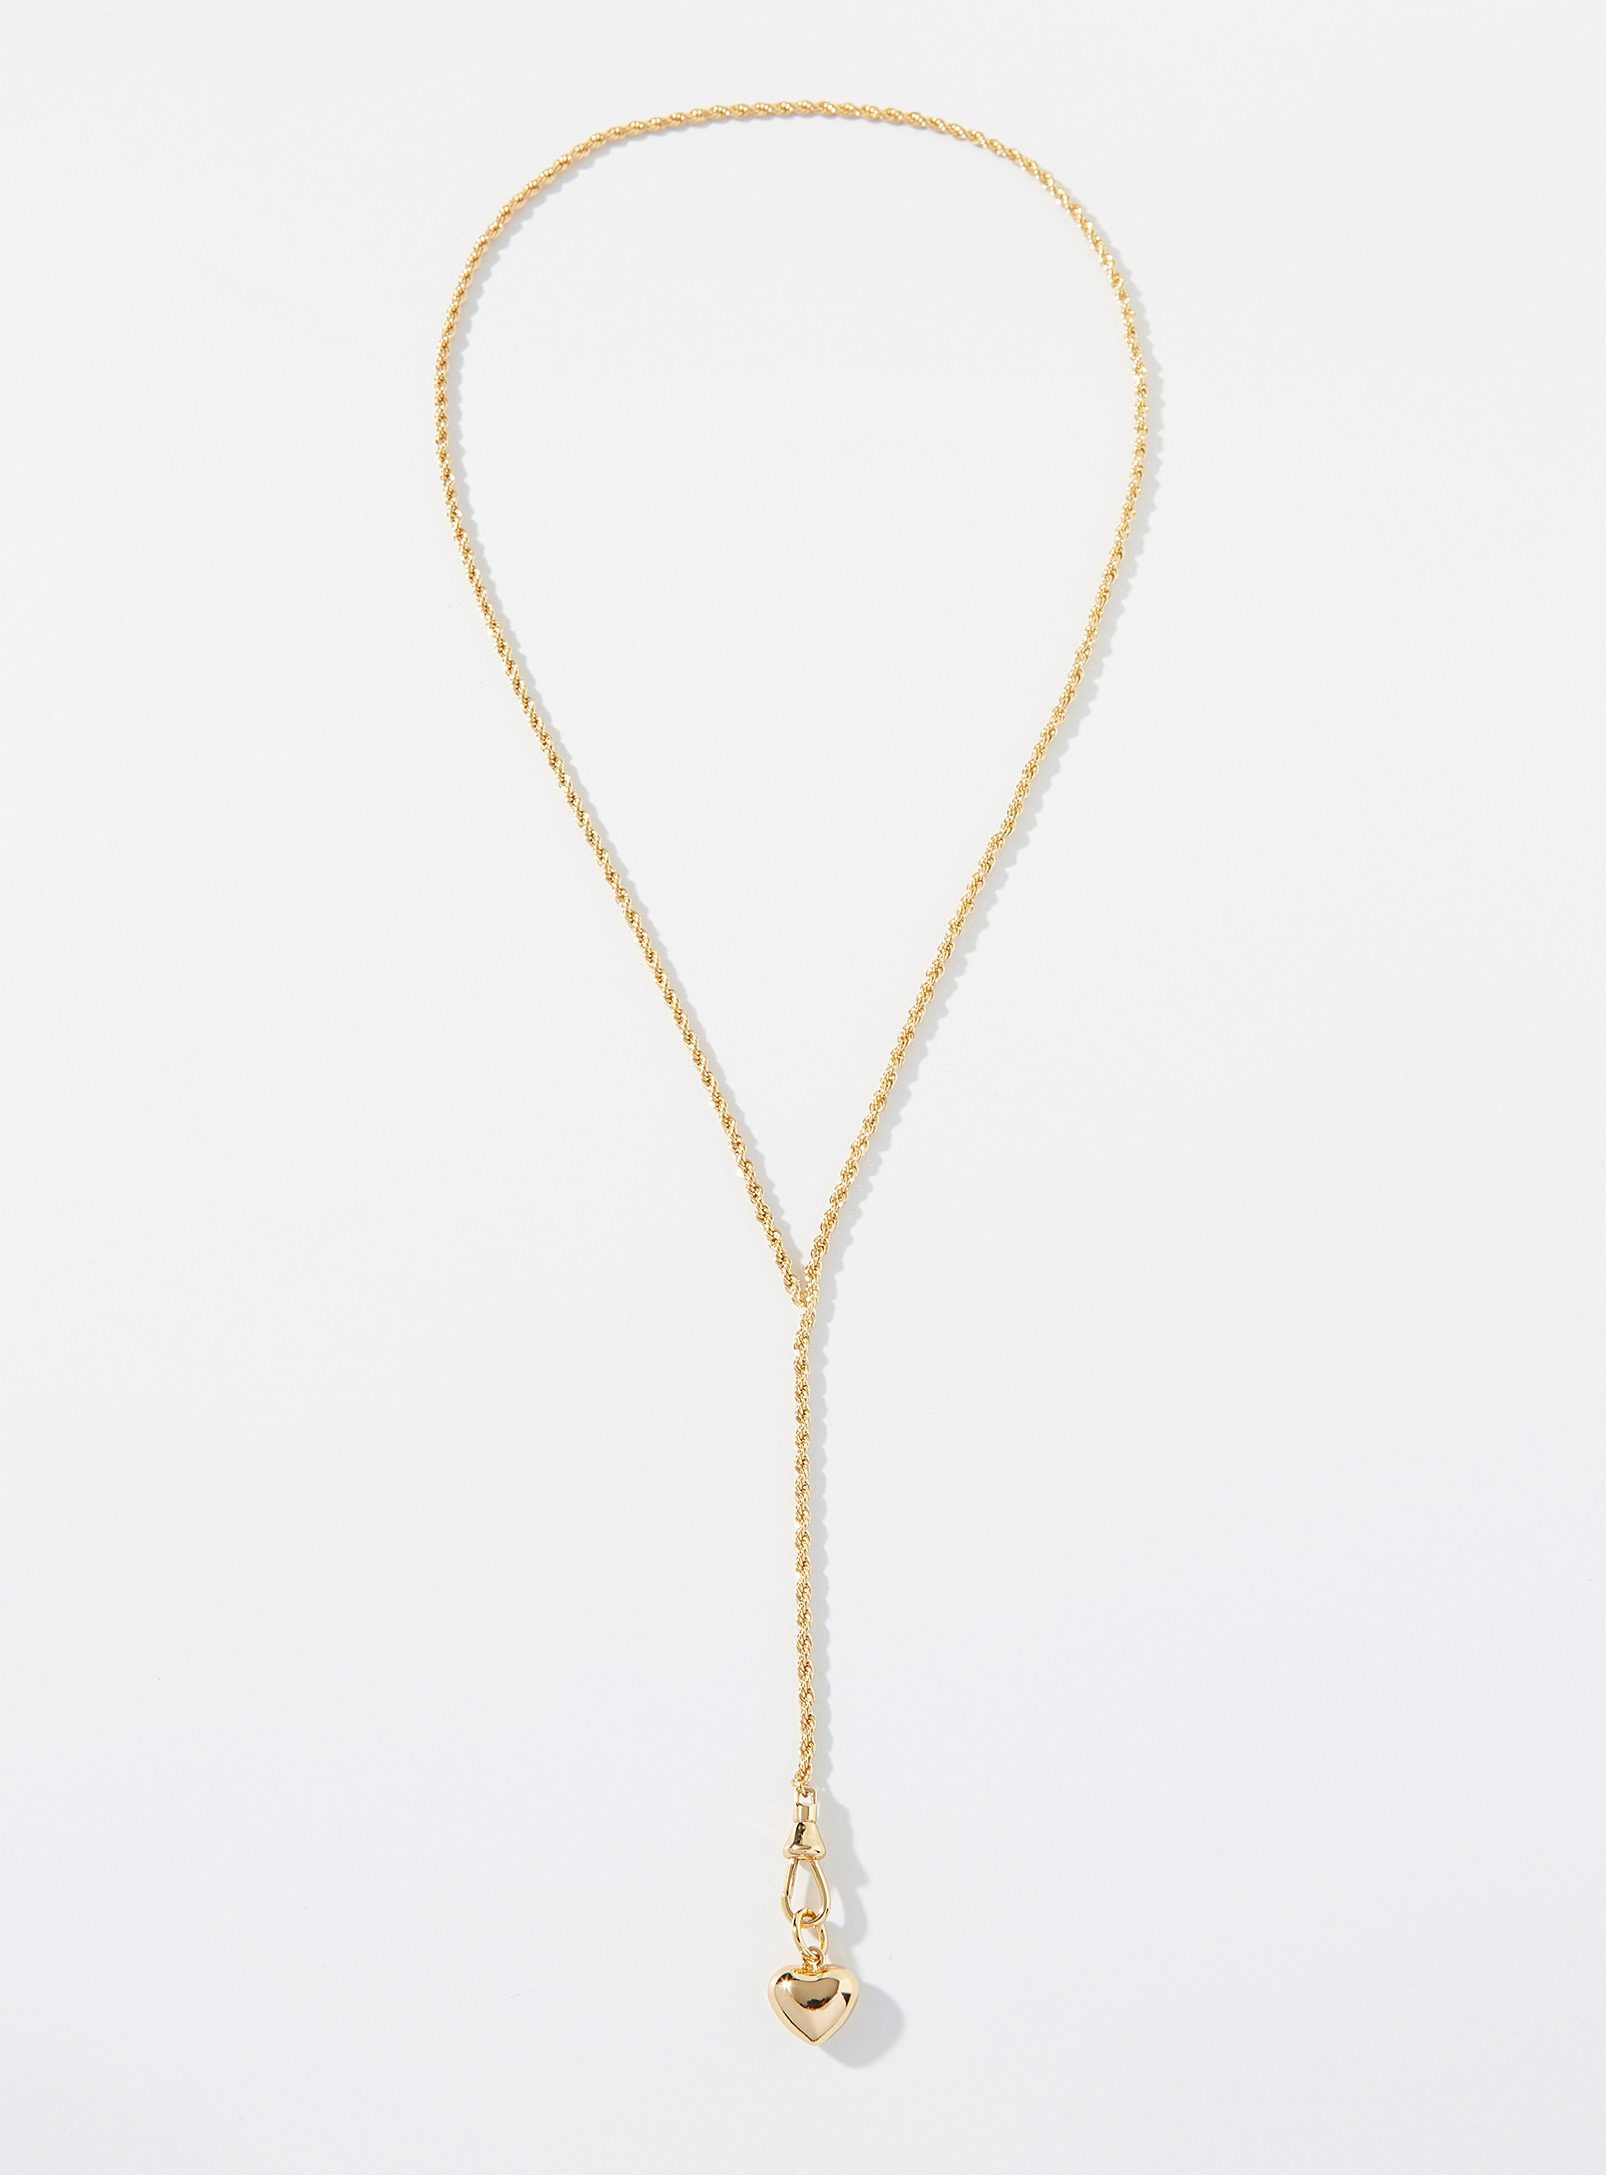 Mademoiselle Jules Golden Heart Lariat Necklace In Assorted